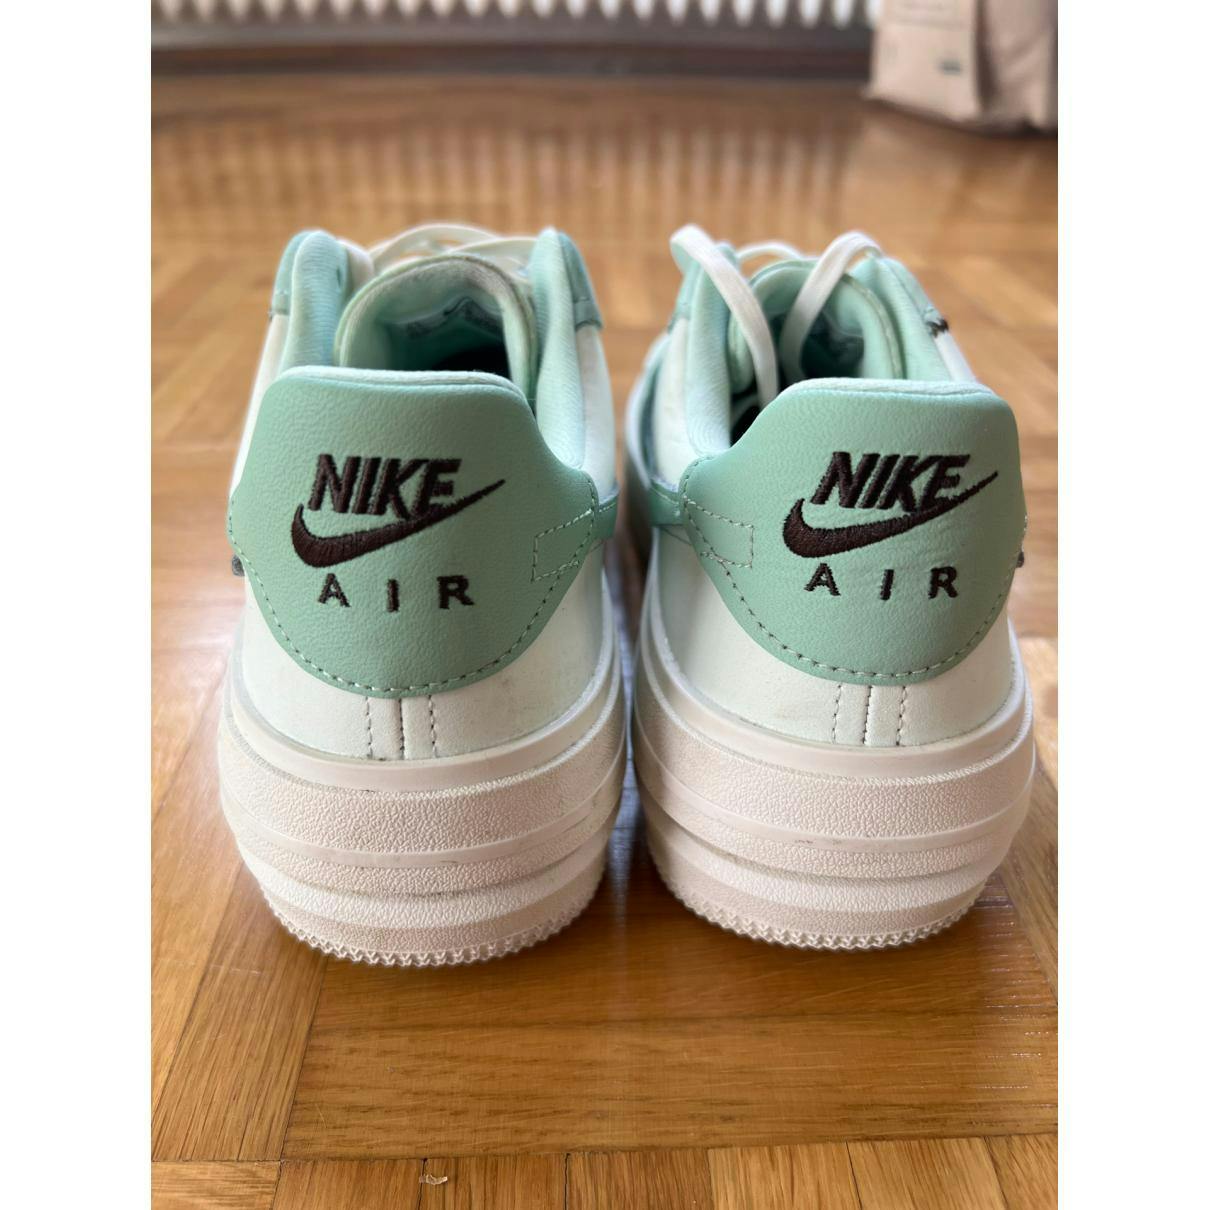 https://images.vestiairecollective.com/cdn-cgi/image/q=75,f=auto,/produit/green-leather-air-force-1-nike-trainers-34609810-2_3.jpg?secret=VC-e9eee96a-a819-4431-ad12-d066be2626ef